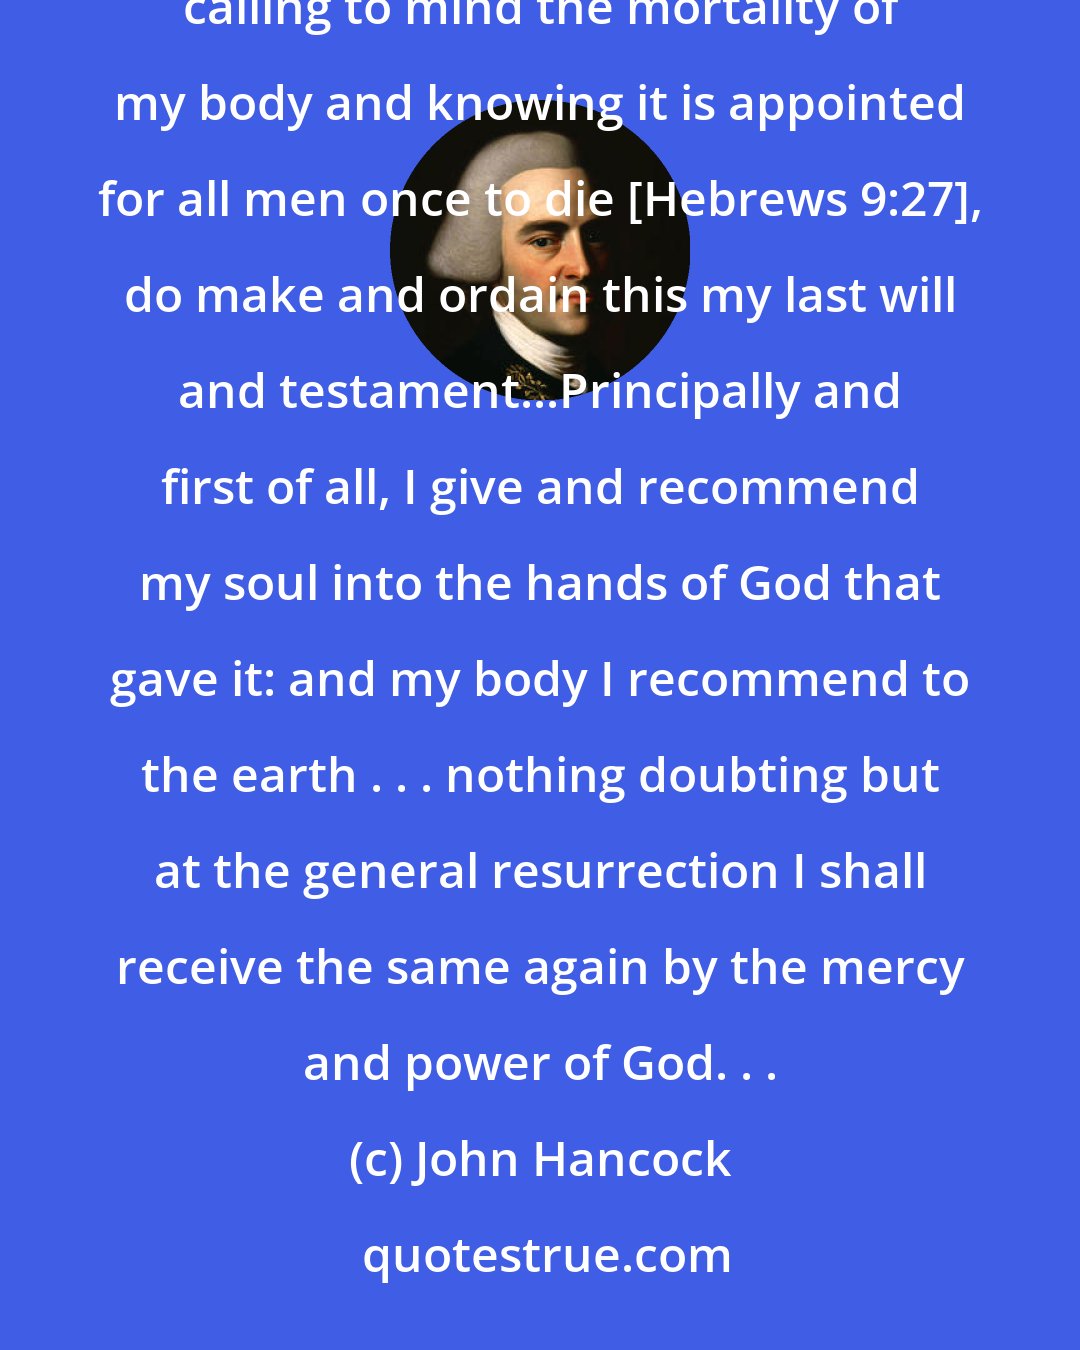 John Hancock: I John Hancock, . . . being advanced in years and being of perfect mind and memory-thanks be given to God-therefore calling to mind the mortality of my body and knowing it is appointed for all men once to die [Hebrews 9:27], do make and ordain this my last will and testament...Principally and first of all, I give and recommend my soul into the hands of God that gave it: and my body I recommend to the earth . . . nothing doubting but at the general resurrection I shall receive the same again by the mercy and power of God. . .